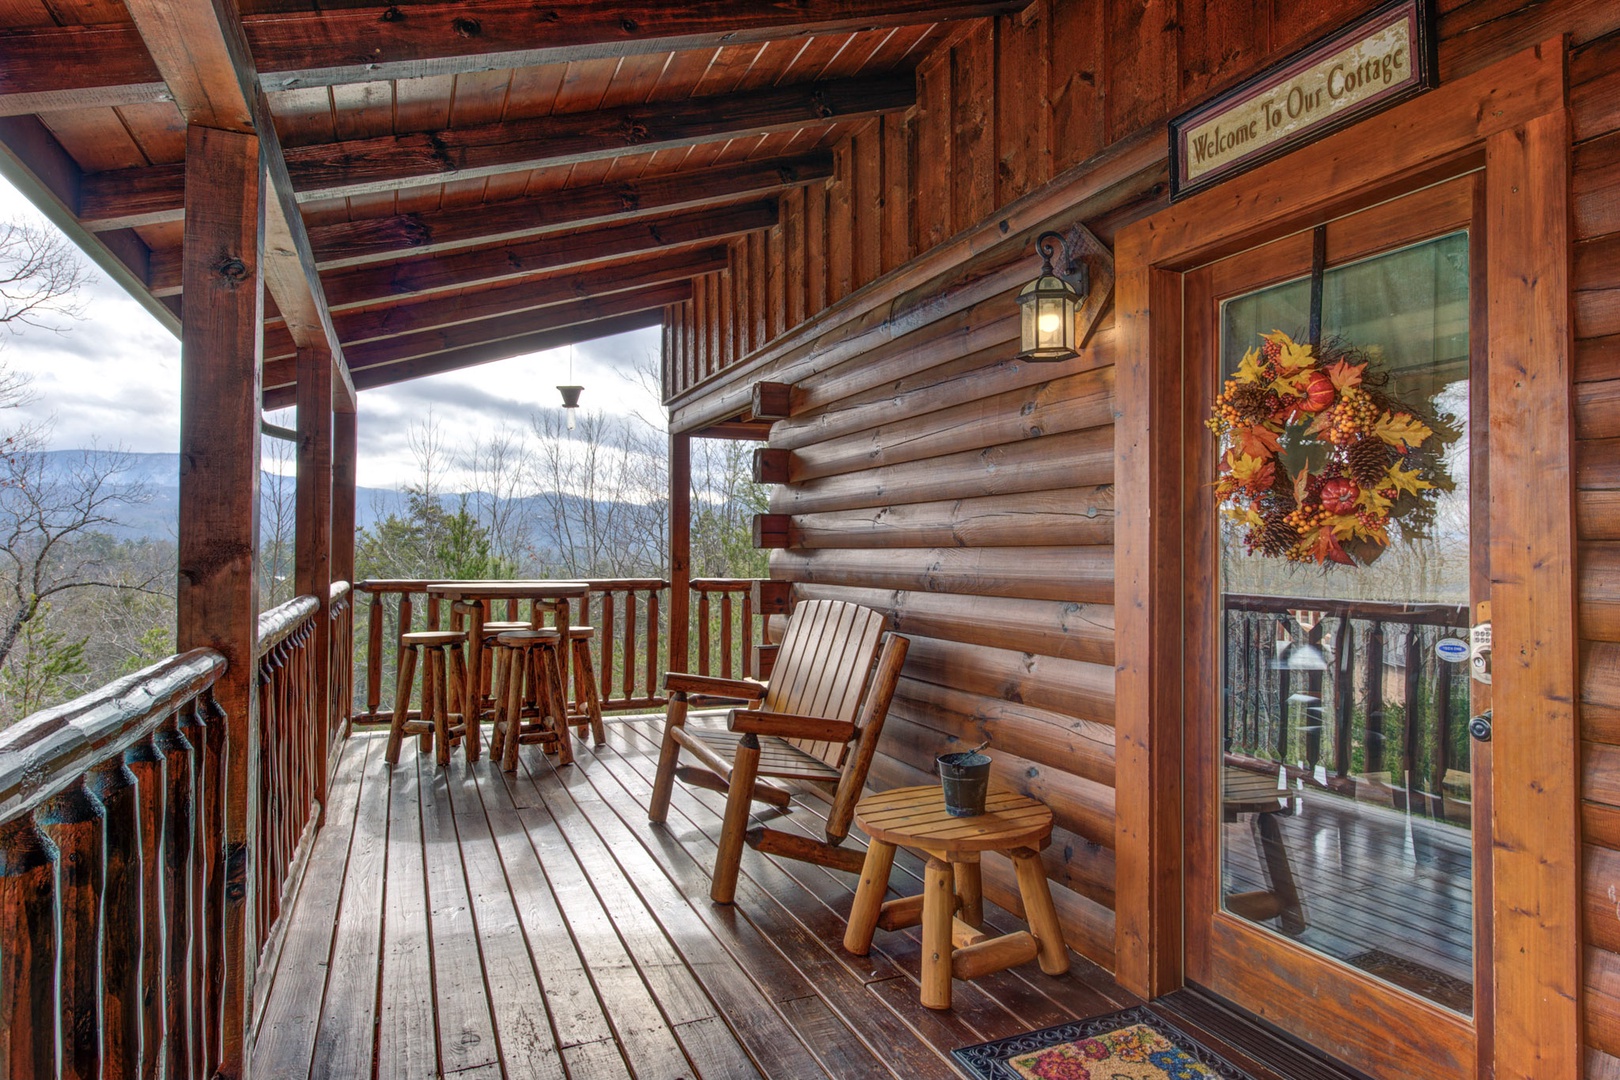 Make a pit stop on the wraparound deck to take in the stunning views